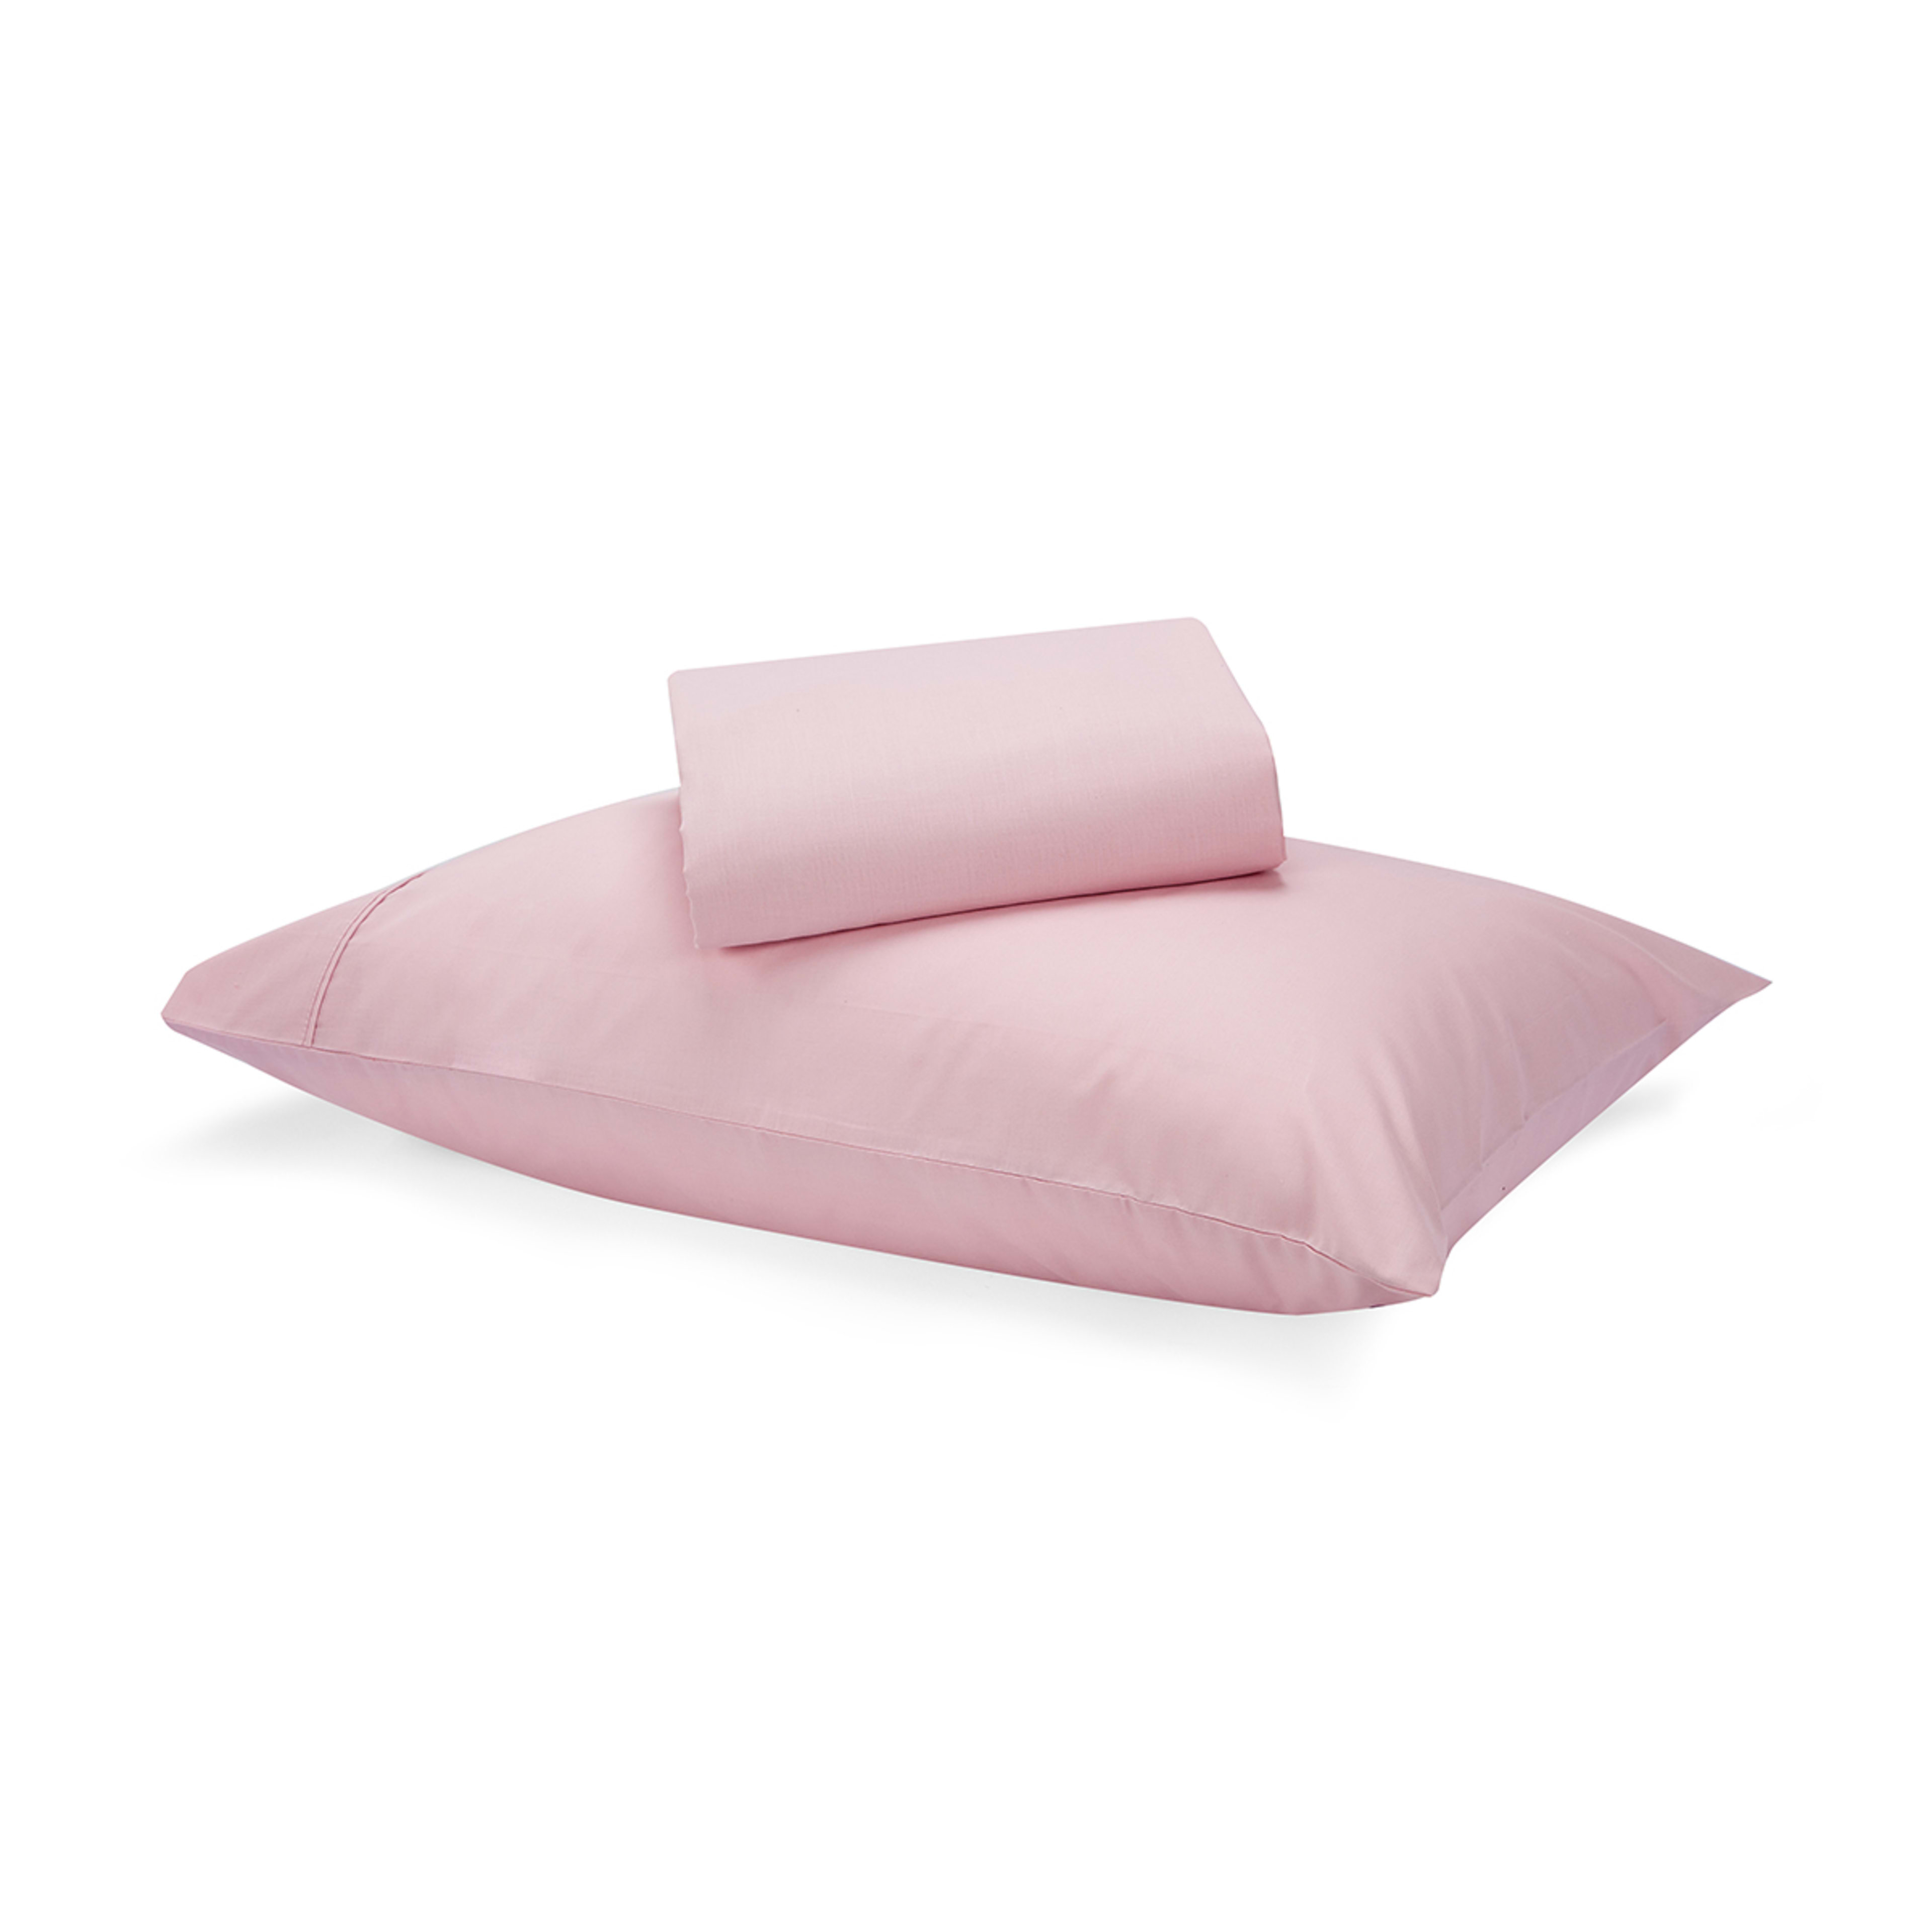 180 Thread Count Sheet Set - Single Bed, Pink